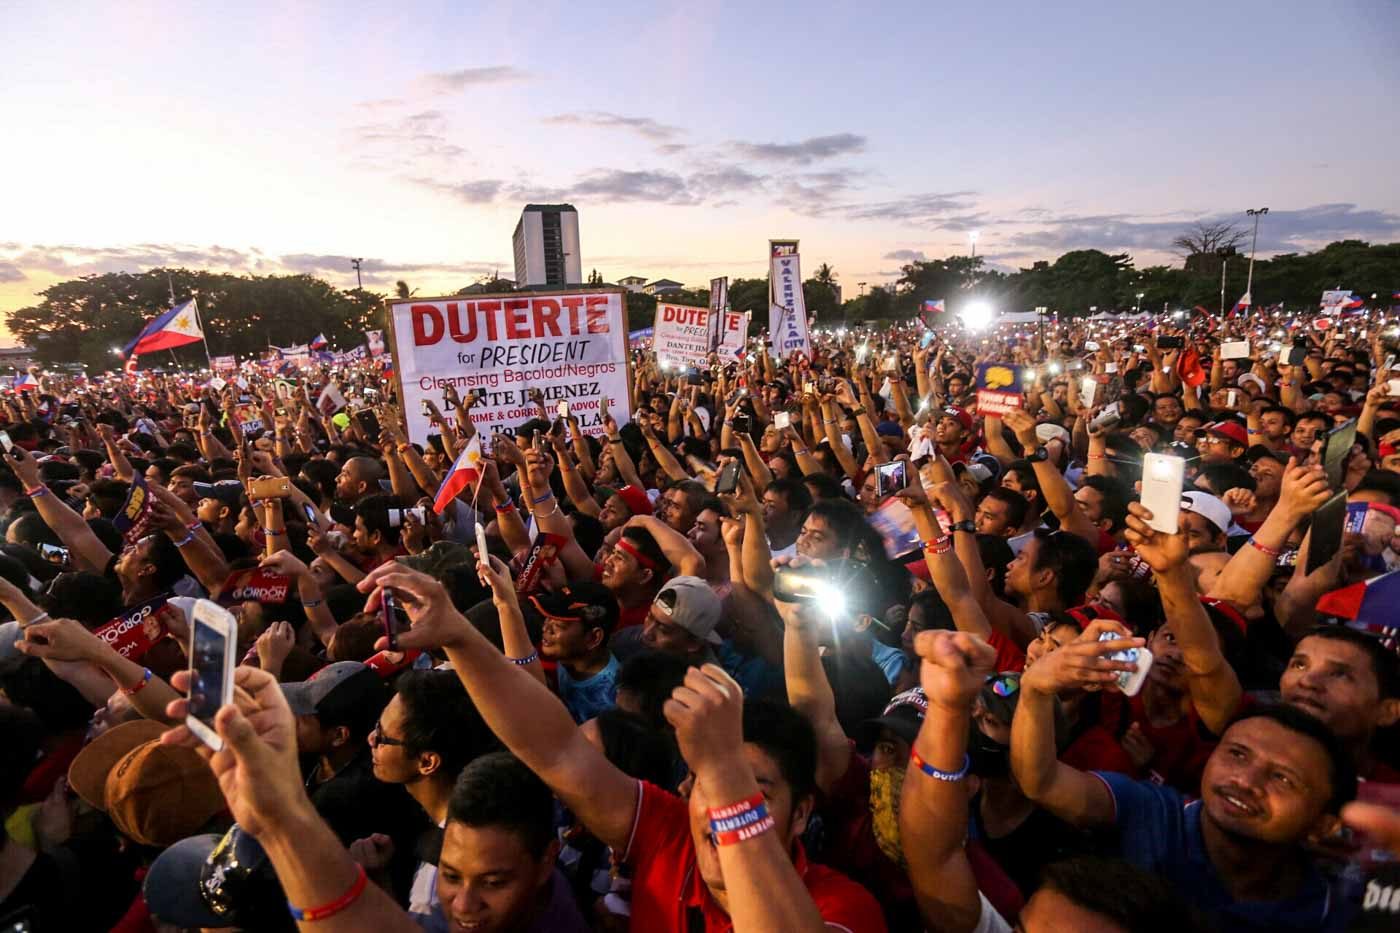 FESTIVE ATMOSPHERE. The mammoth crowd at the Duterte-Cayetano miting de avance shows love for the candidates.  Photo by Manman Dejeto/Rappler 